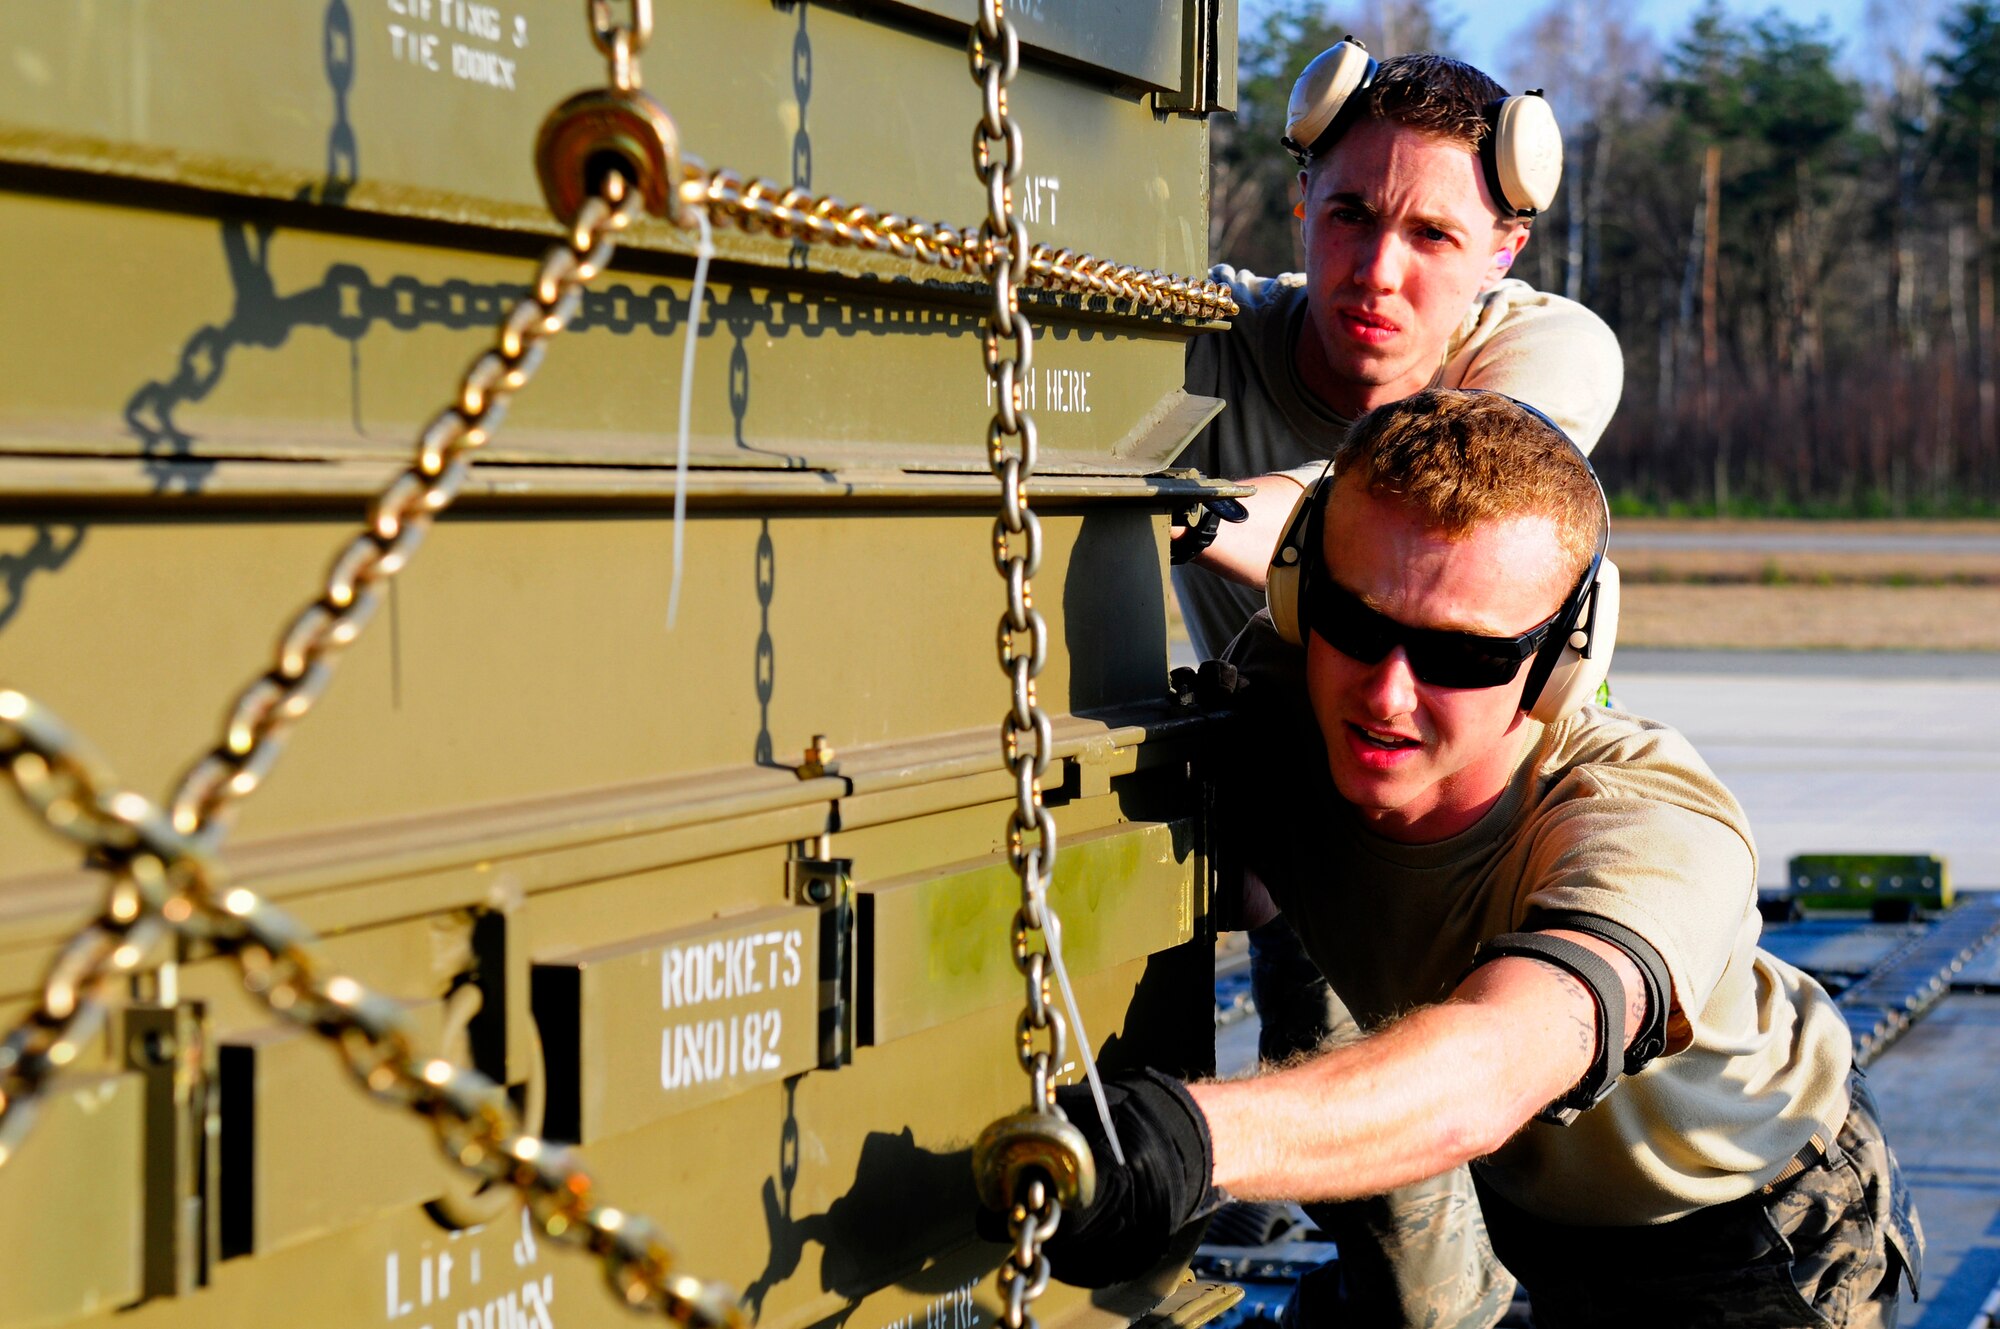 U.S. Air Force Airman 1st Class Bradley Stinson and Airman 1st Class Casey Williams, 721st Aerial Port Squadron, load cargo onto a C-130J Super Hercules in preparation for its departure in support of Joint Task Force Odyssey Dawn, Ramstein Air Base, Germany, March 23, 2011. The U.S. Africa Command task force was established to prodive operational and tactical command and control of U.S. military forces supporting the international response to the unrest in Libya and enforcement of United Nations Security concil Resolutin 1973. UNSCR 1873 authorizes all necessary measures to protect civilians in Libya under threat of attack by Qadhafi regime forces. JTF Odyssey Dawn is commanded by U.S. Navy Admiral Samuel J. Locklear, III. (U.S. Air Force Photo by Airman 1st Class Brea Miller)